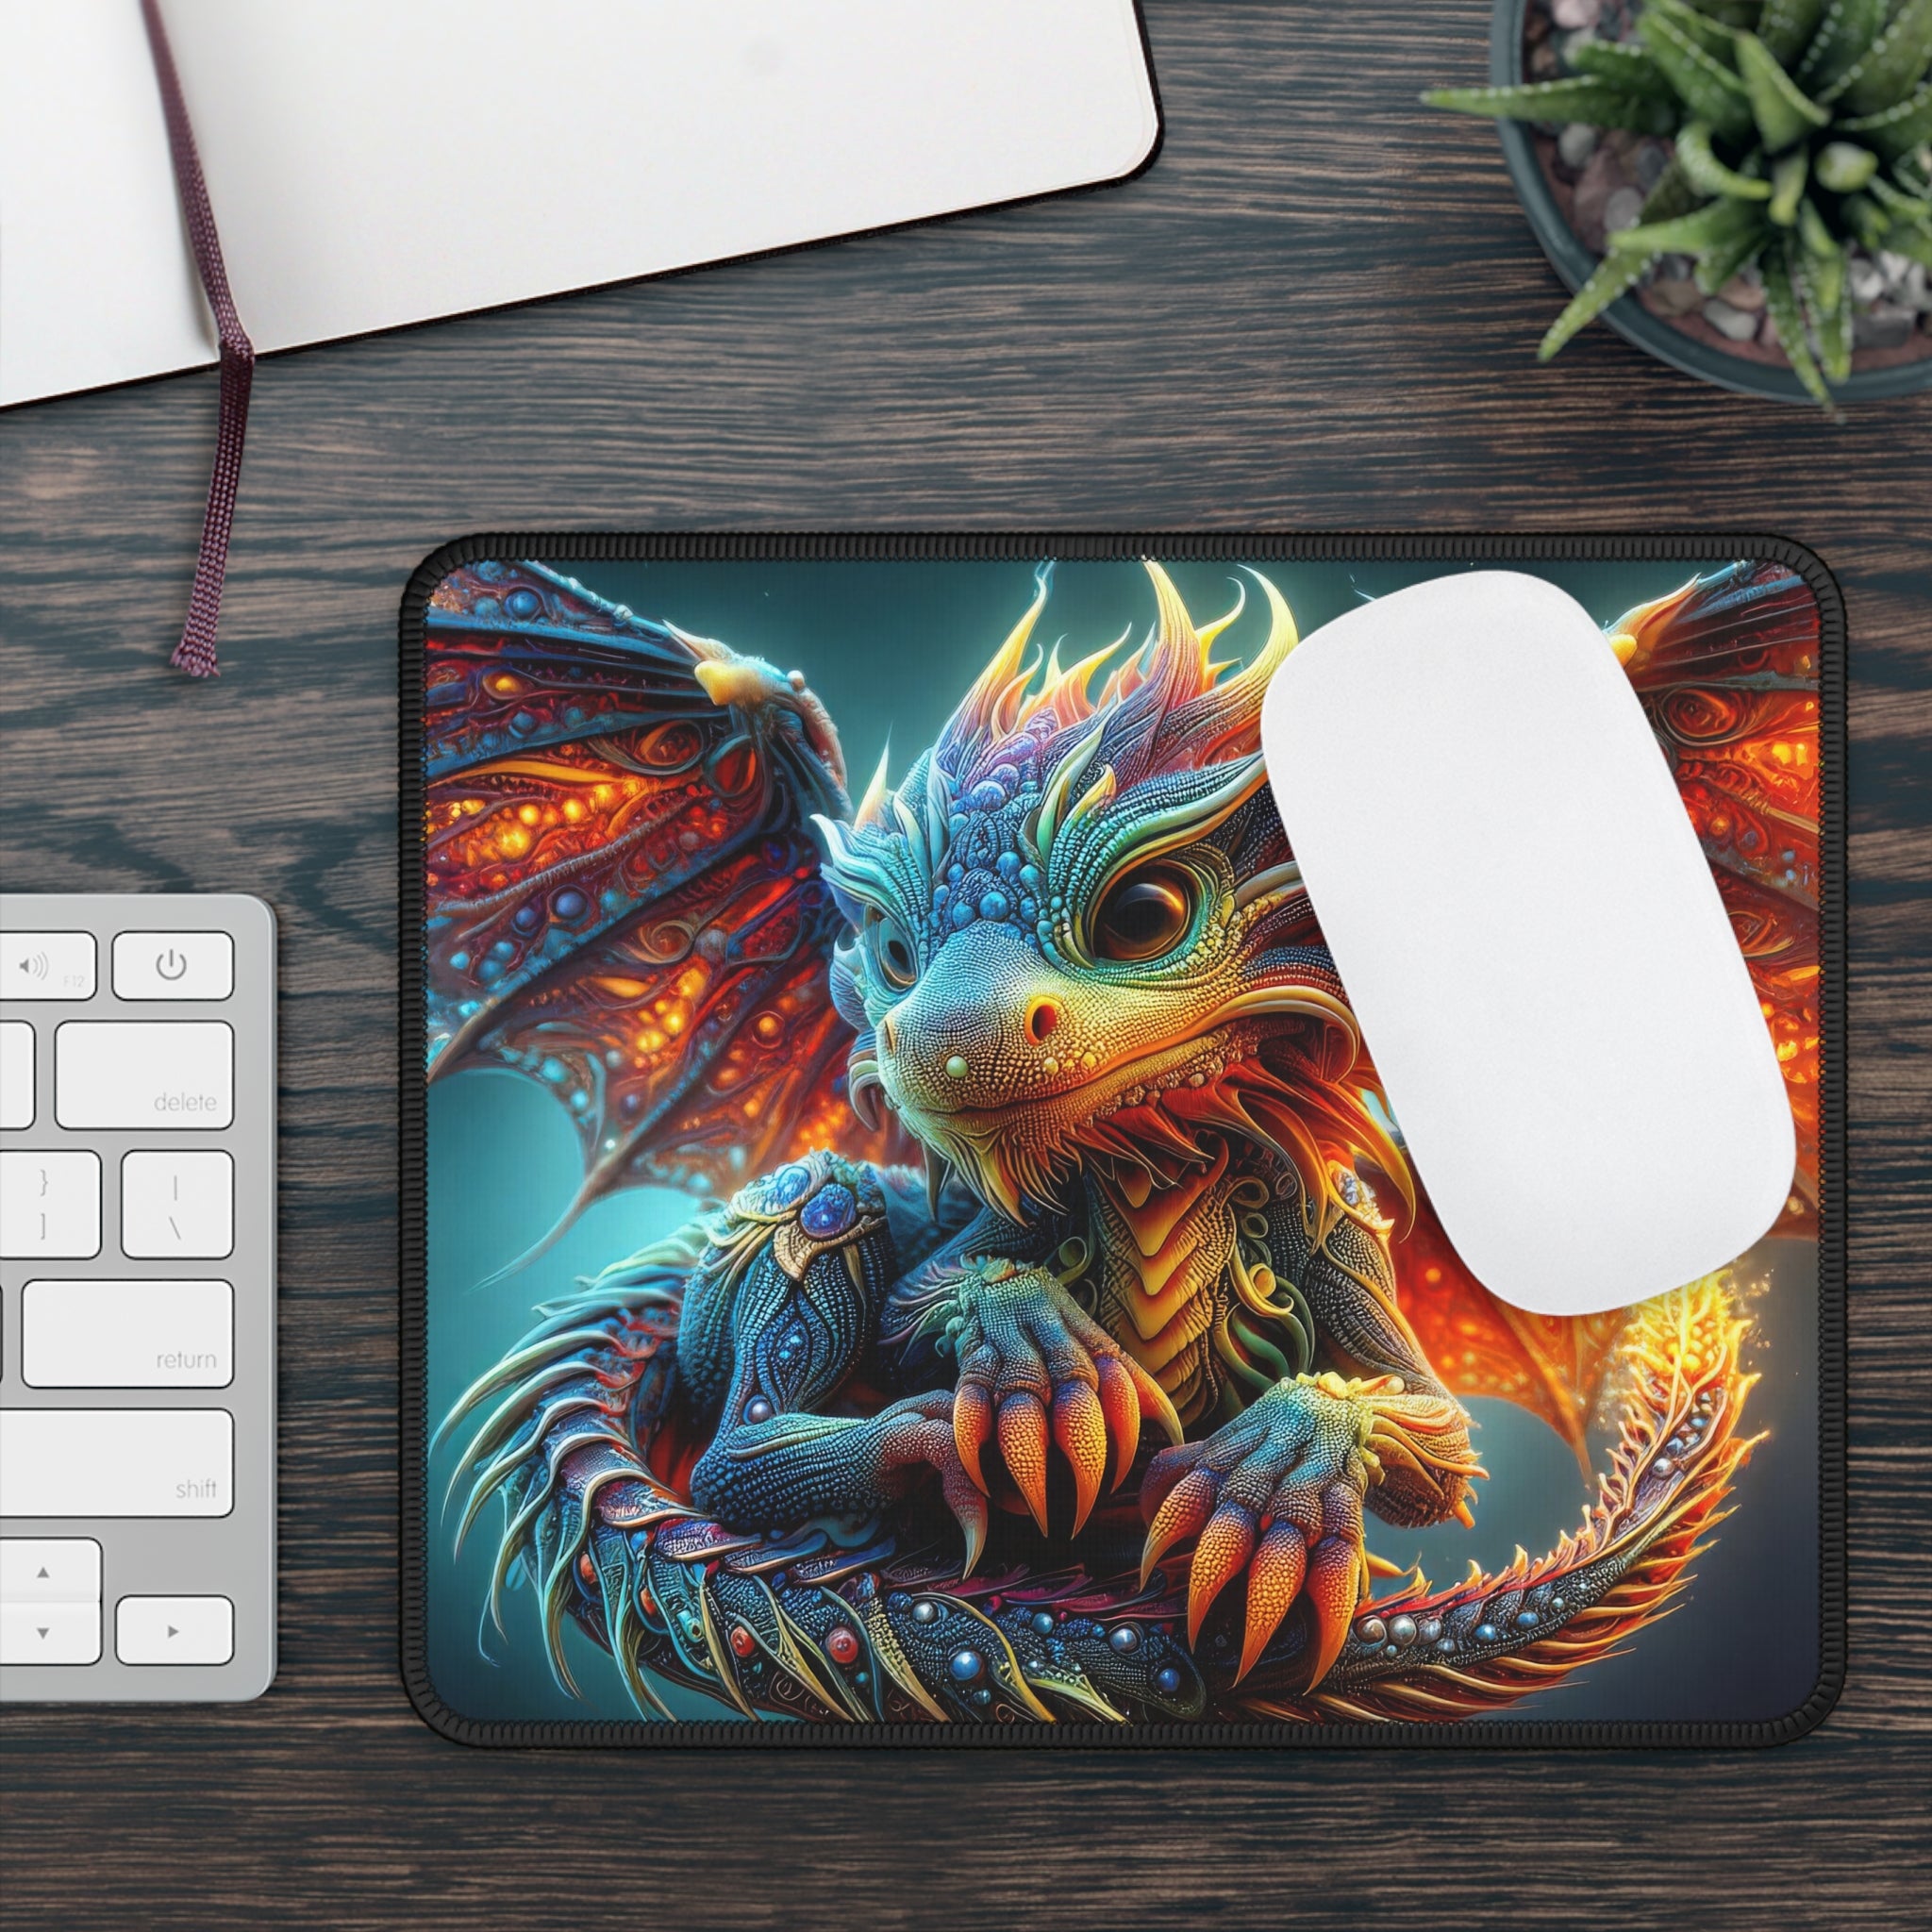 The Gilded Wyvern Gaming Mouse Pad